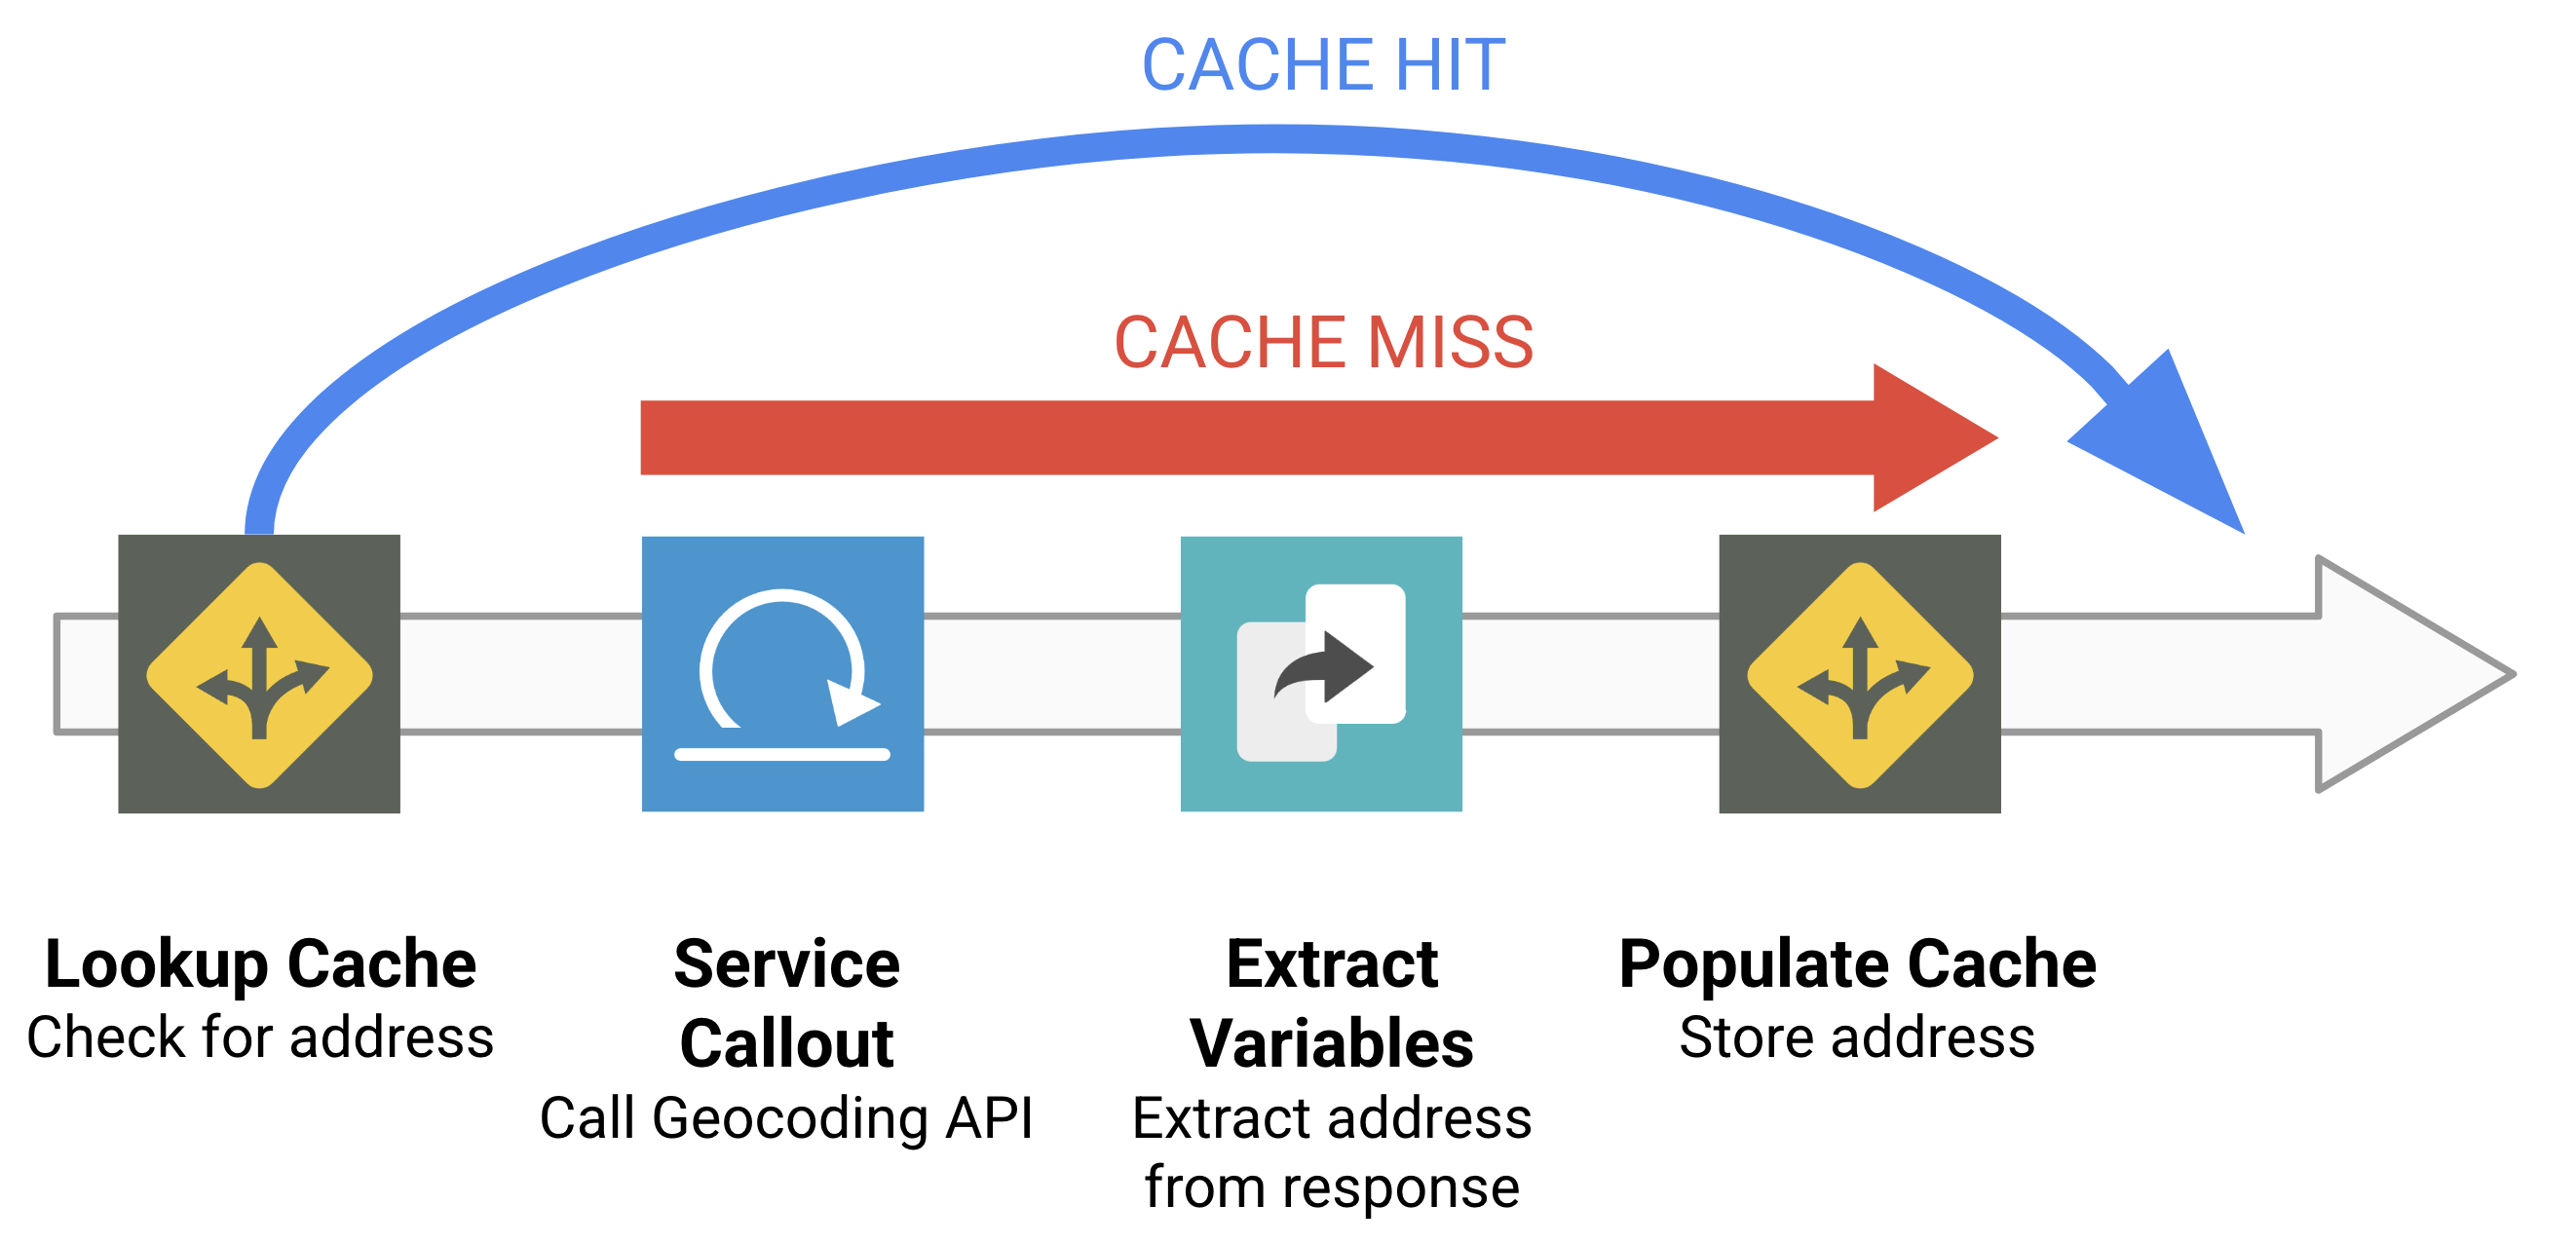 CACHE HIT and CACHE miss displayed across the Lookup Cache, Service Callout, Extract Variables and Populate Cache steps